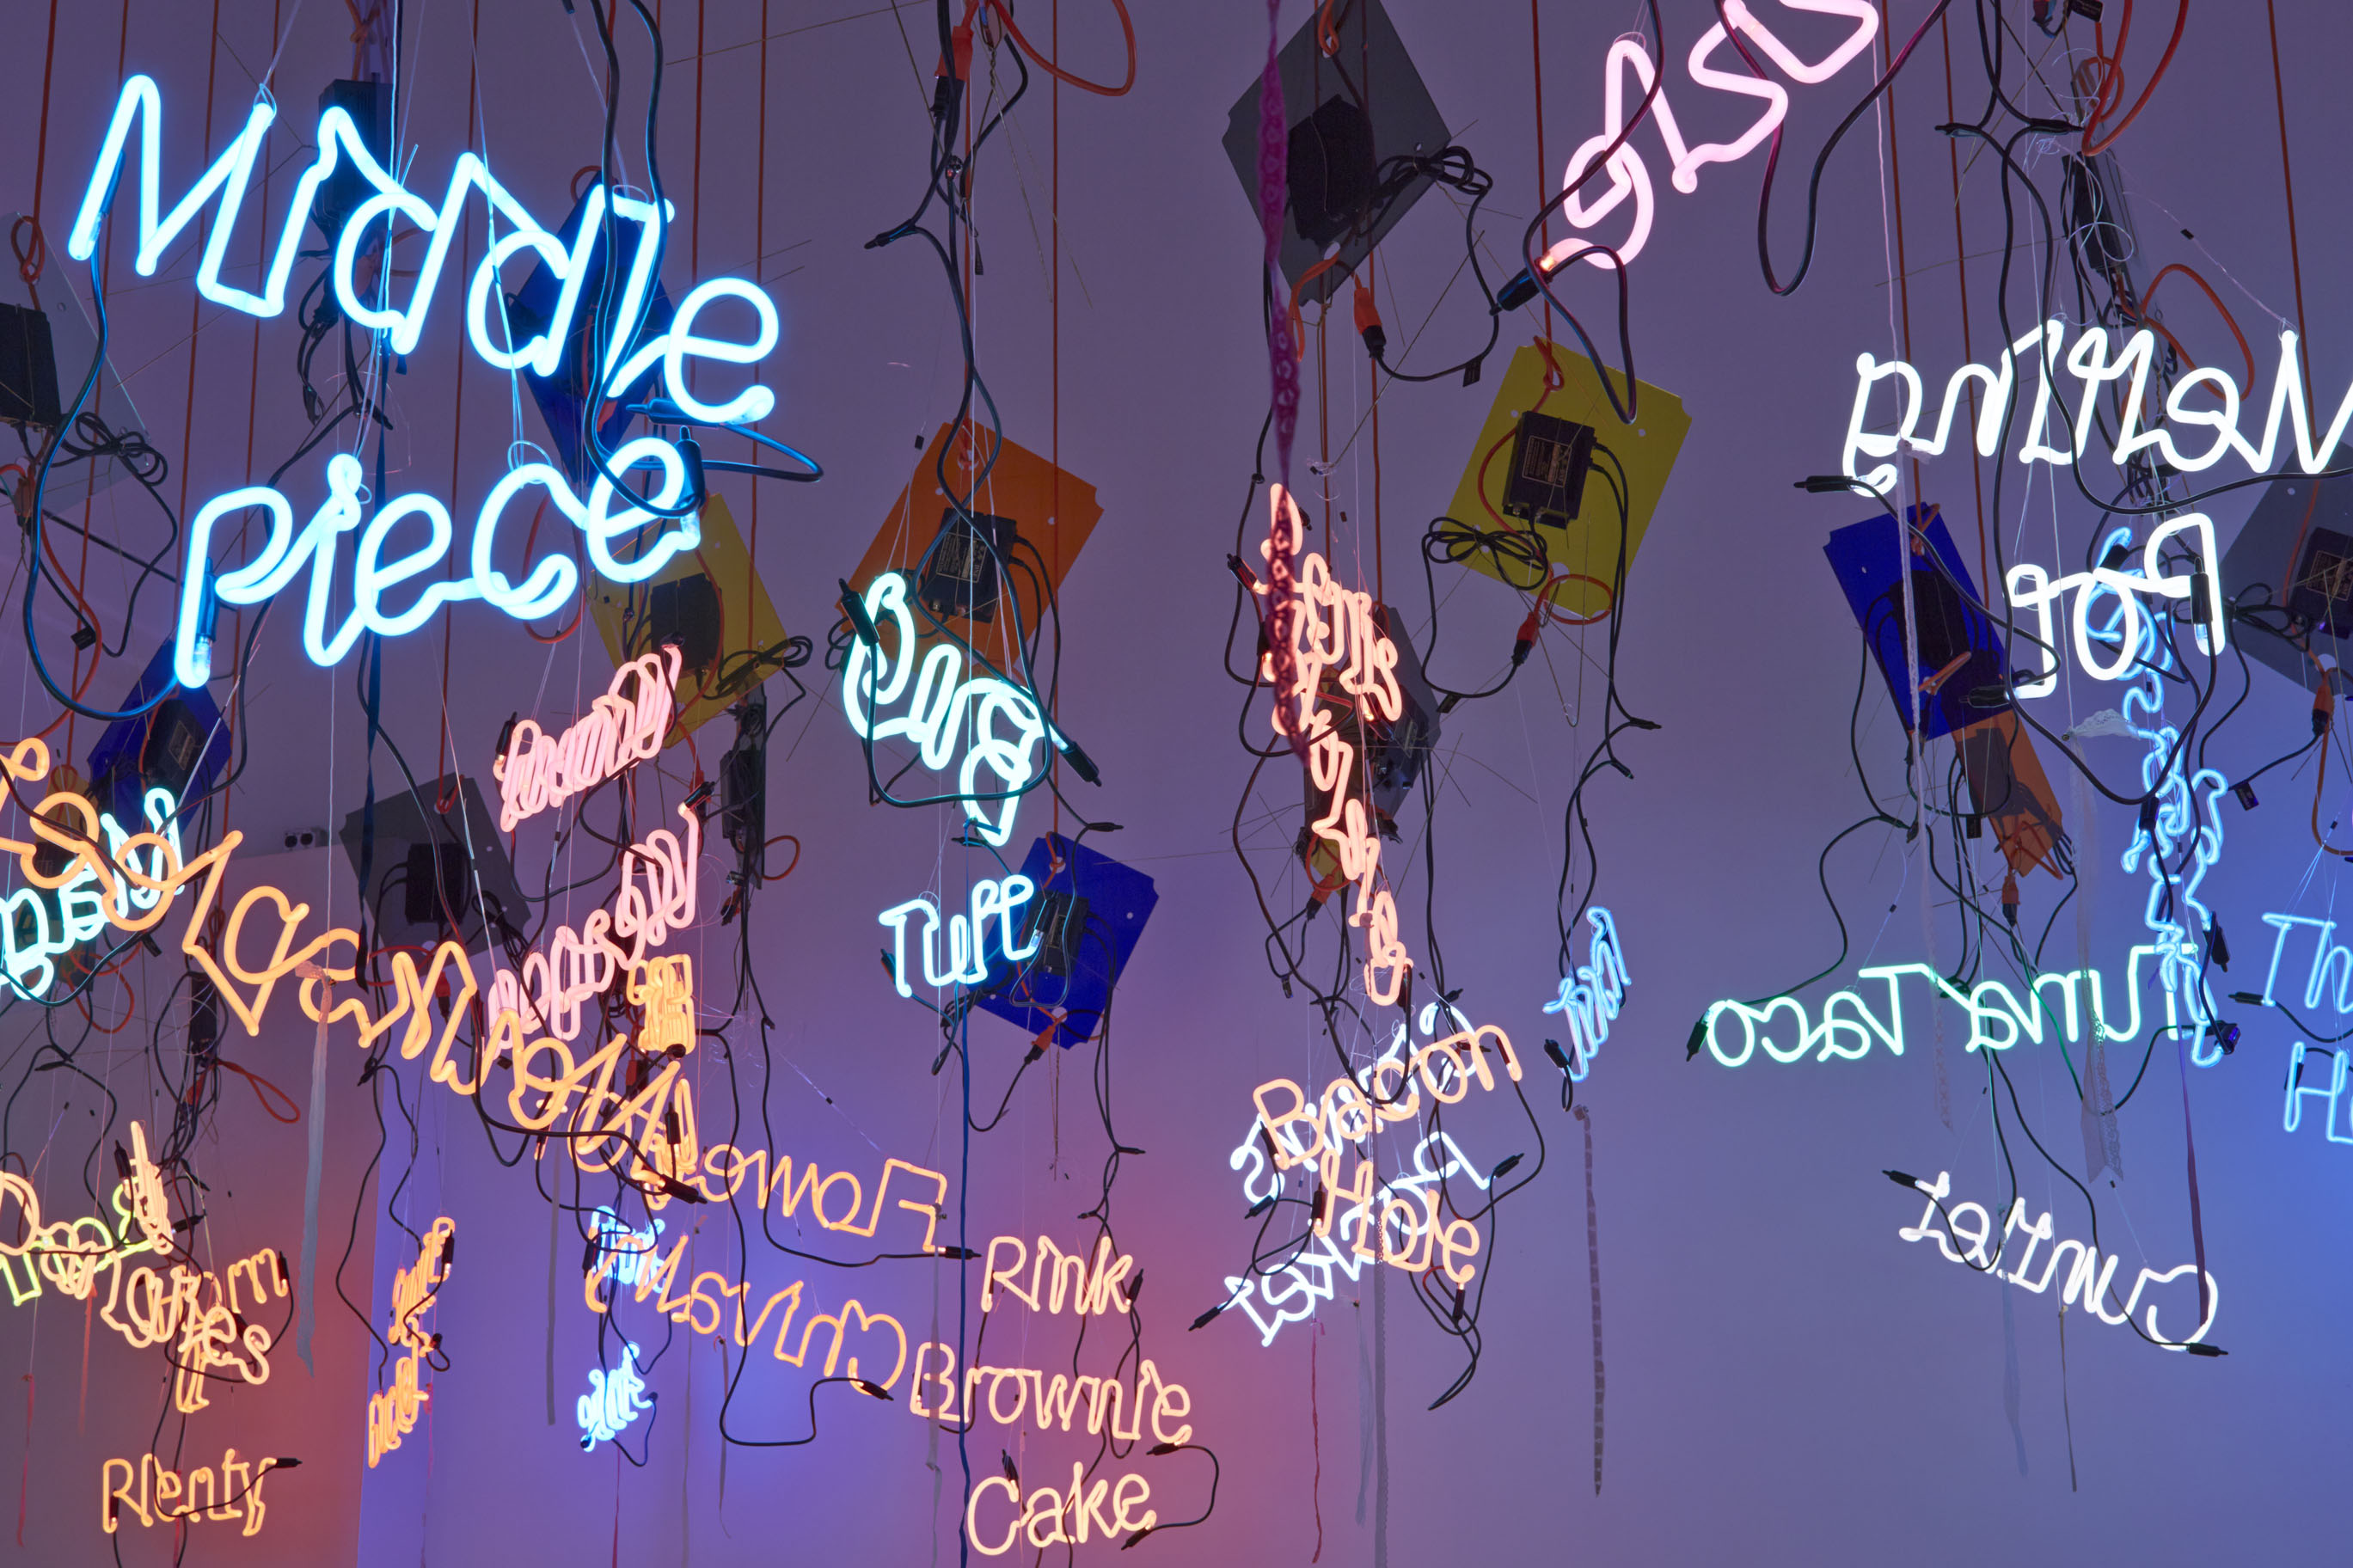 Jason Rhoades, from My Madinah: In pursuit of my hermitage…, 2004/2013, installation view, Institute of Contemporary Art University of Pennsylvania. Photo: Aaron Igler/Greenhouse Media.